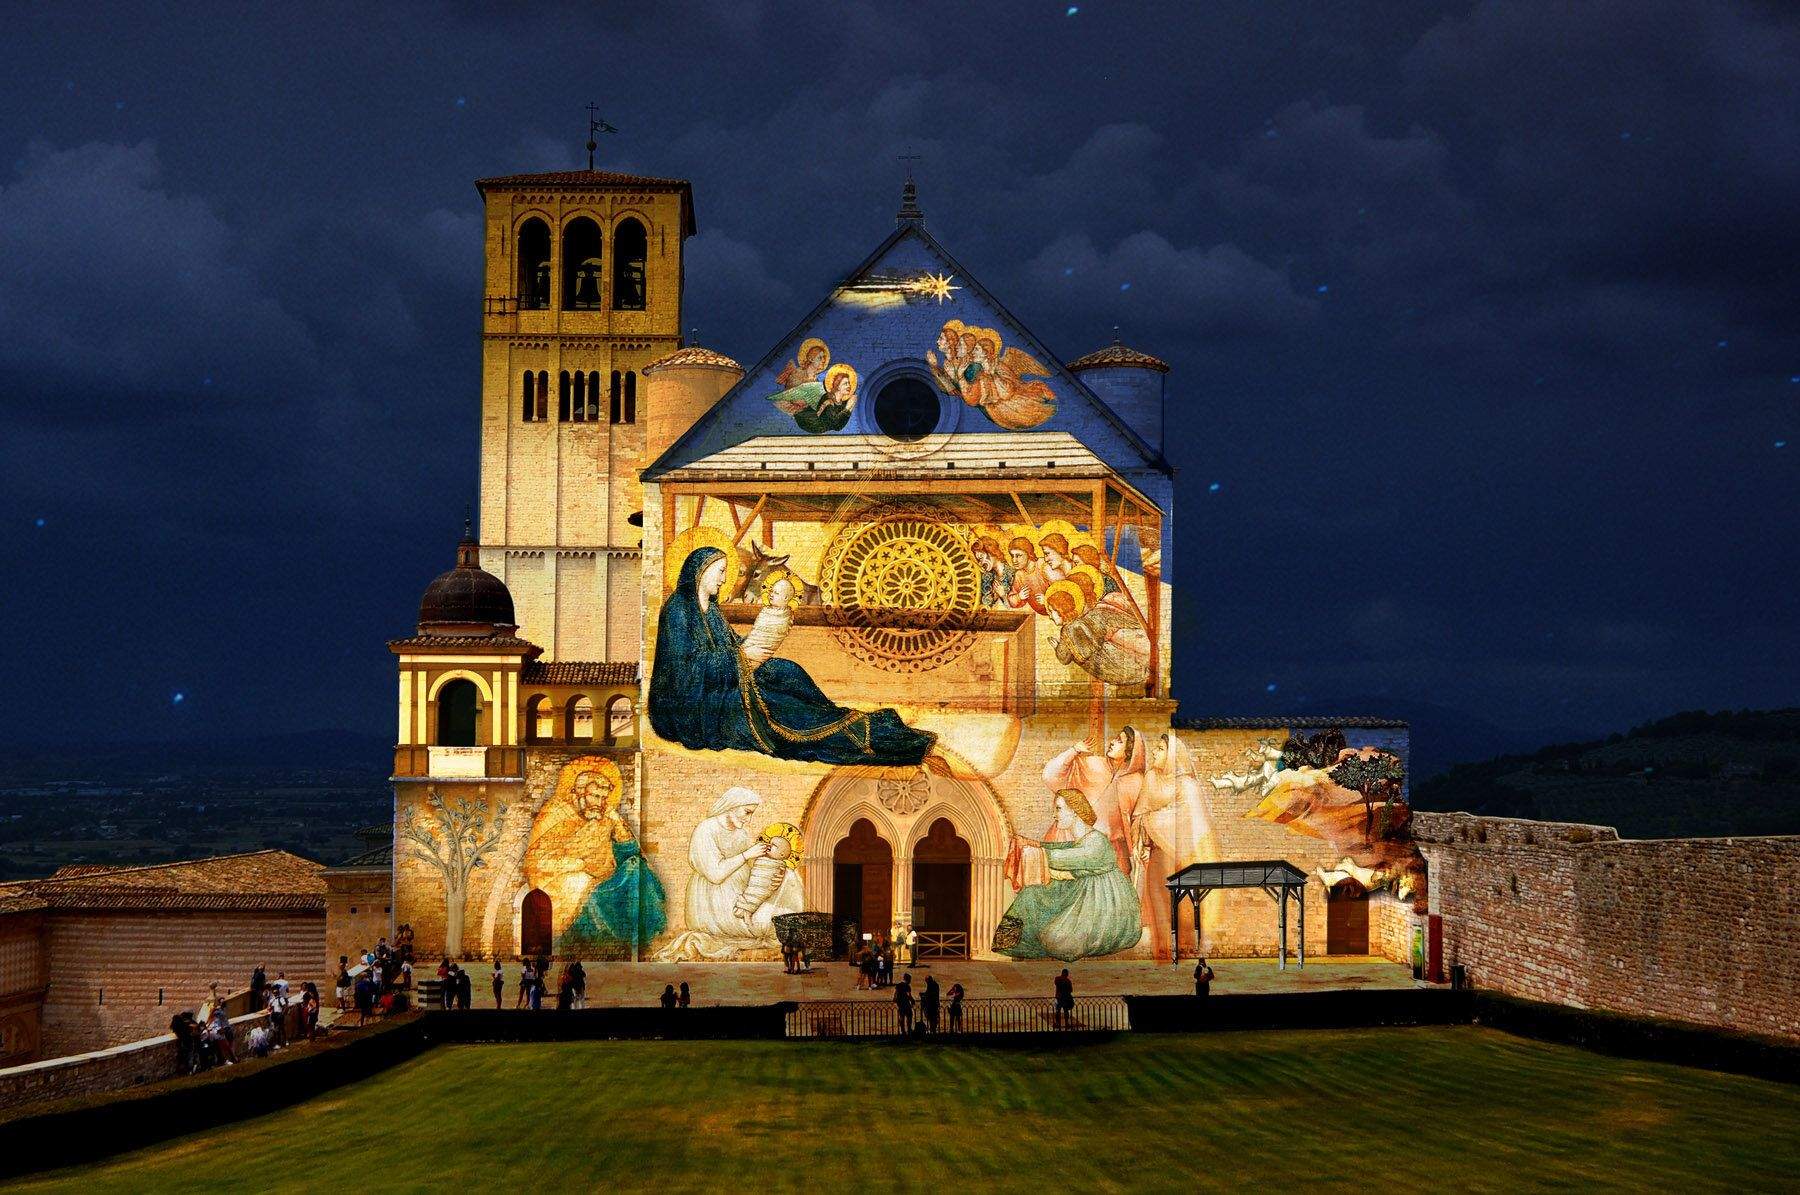 Assisi, for Christmas video projections of Giotto's frescoes on the facade of the Basilica